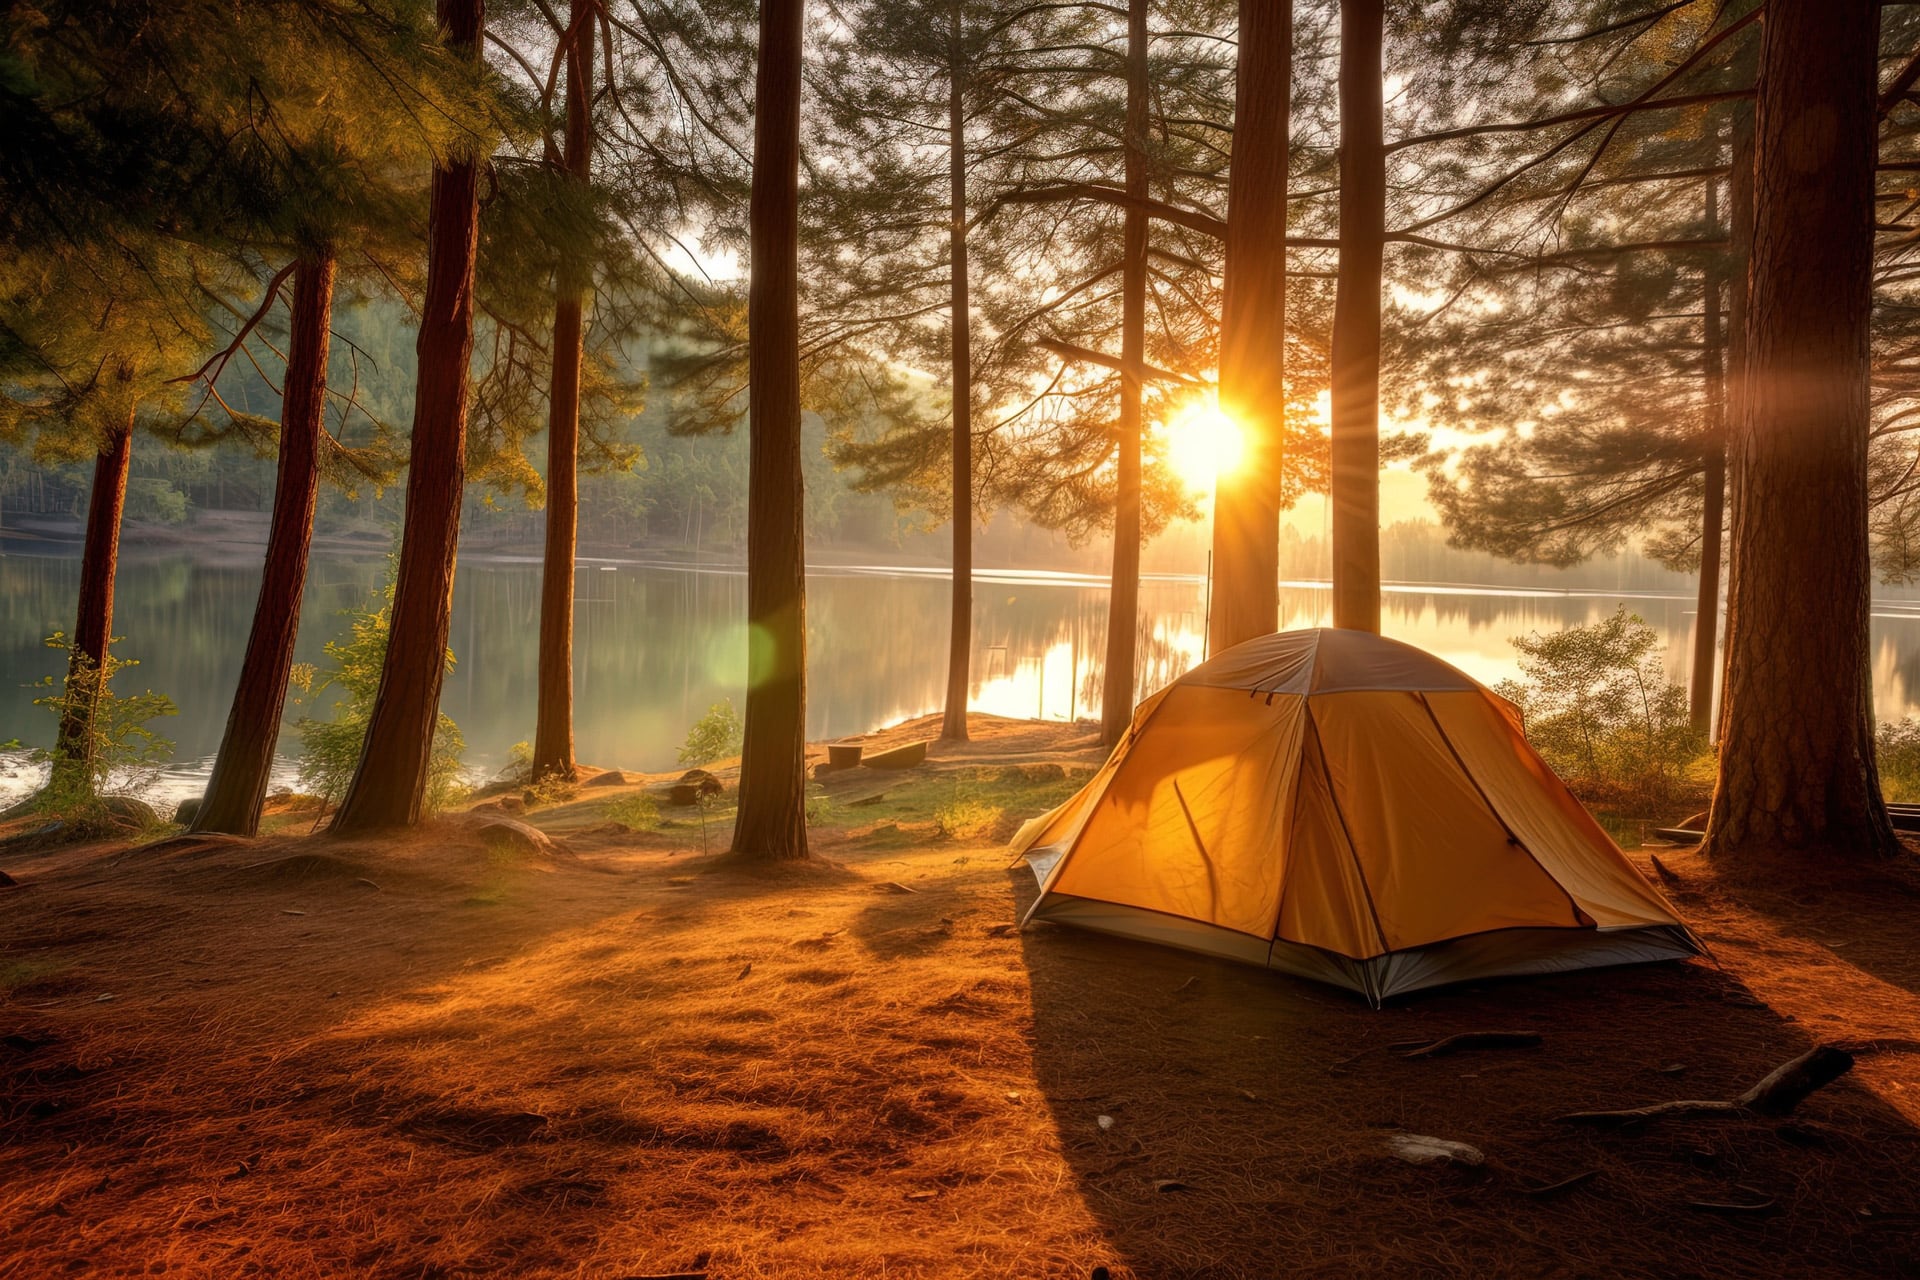 A tent sits in a pine forest overlooking a lake at sunrise.